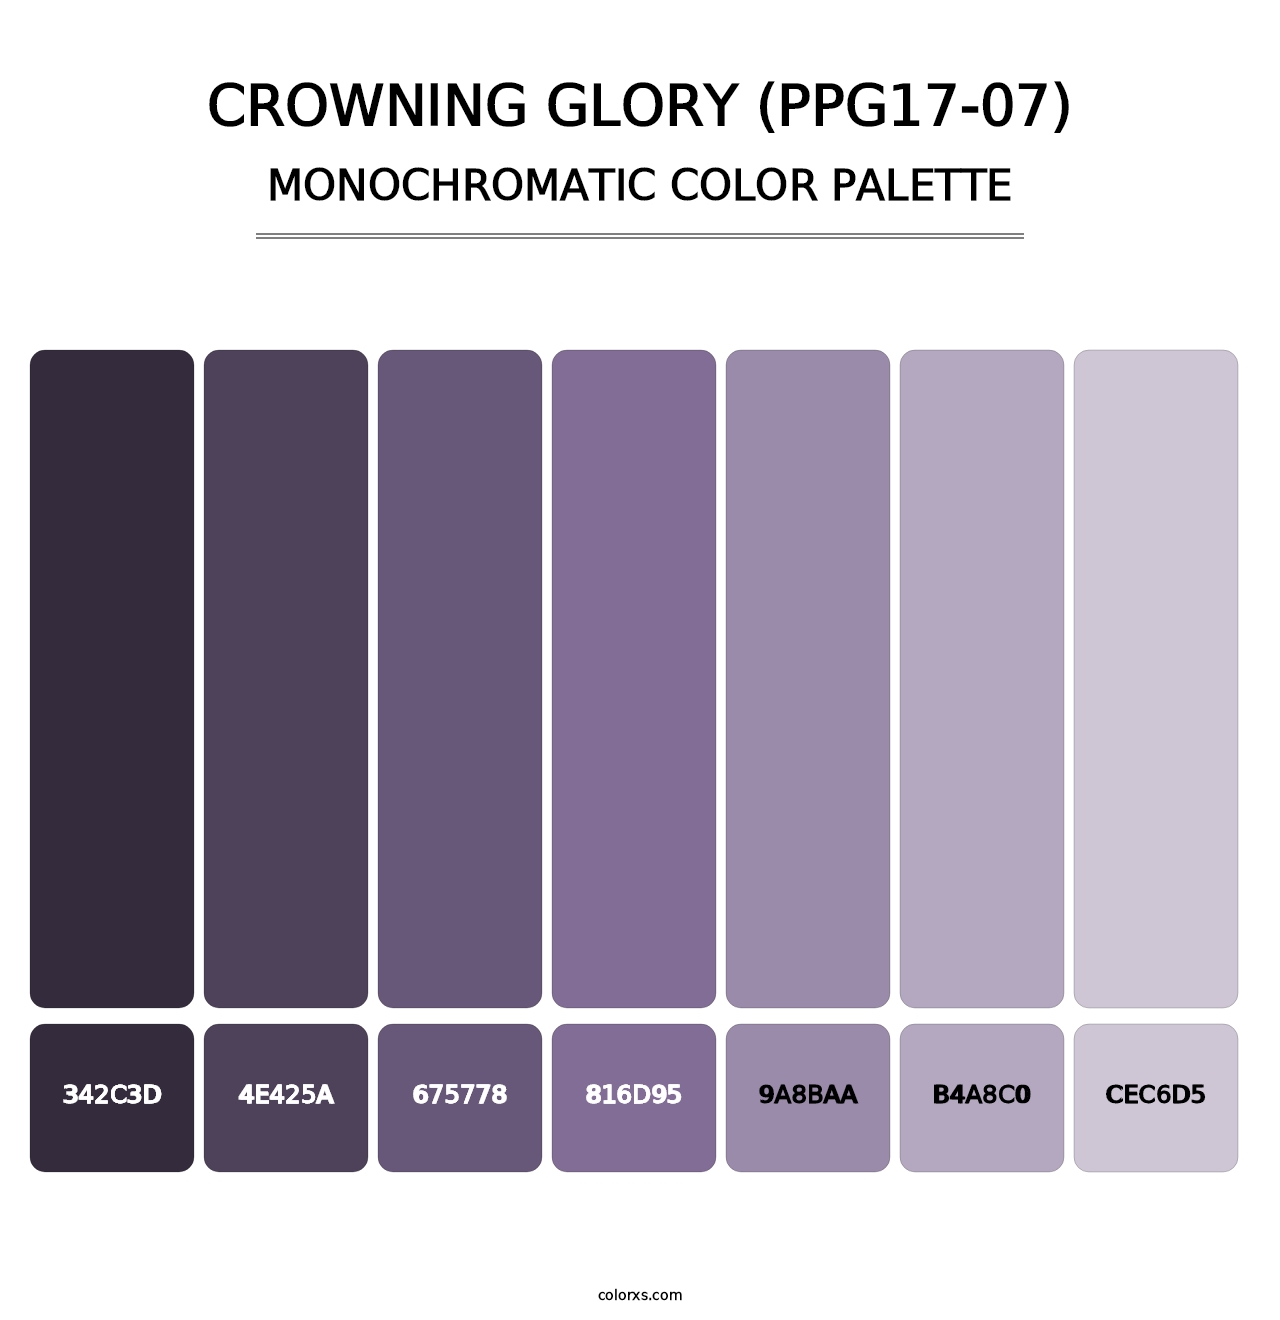 Crowning Glory (PPG17-07) - Monochromatic Color Palette